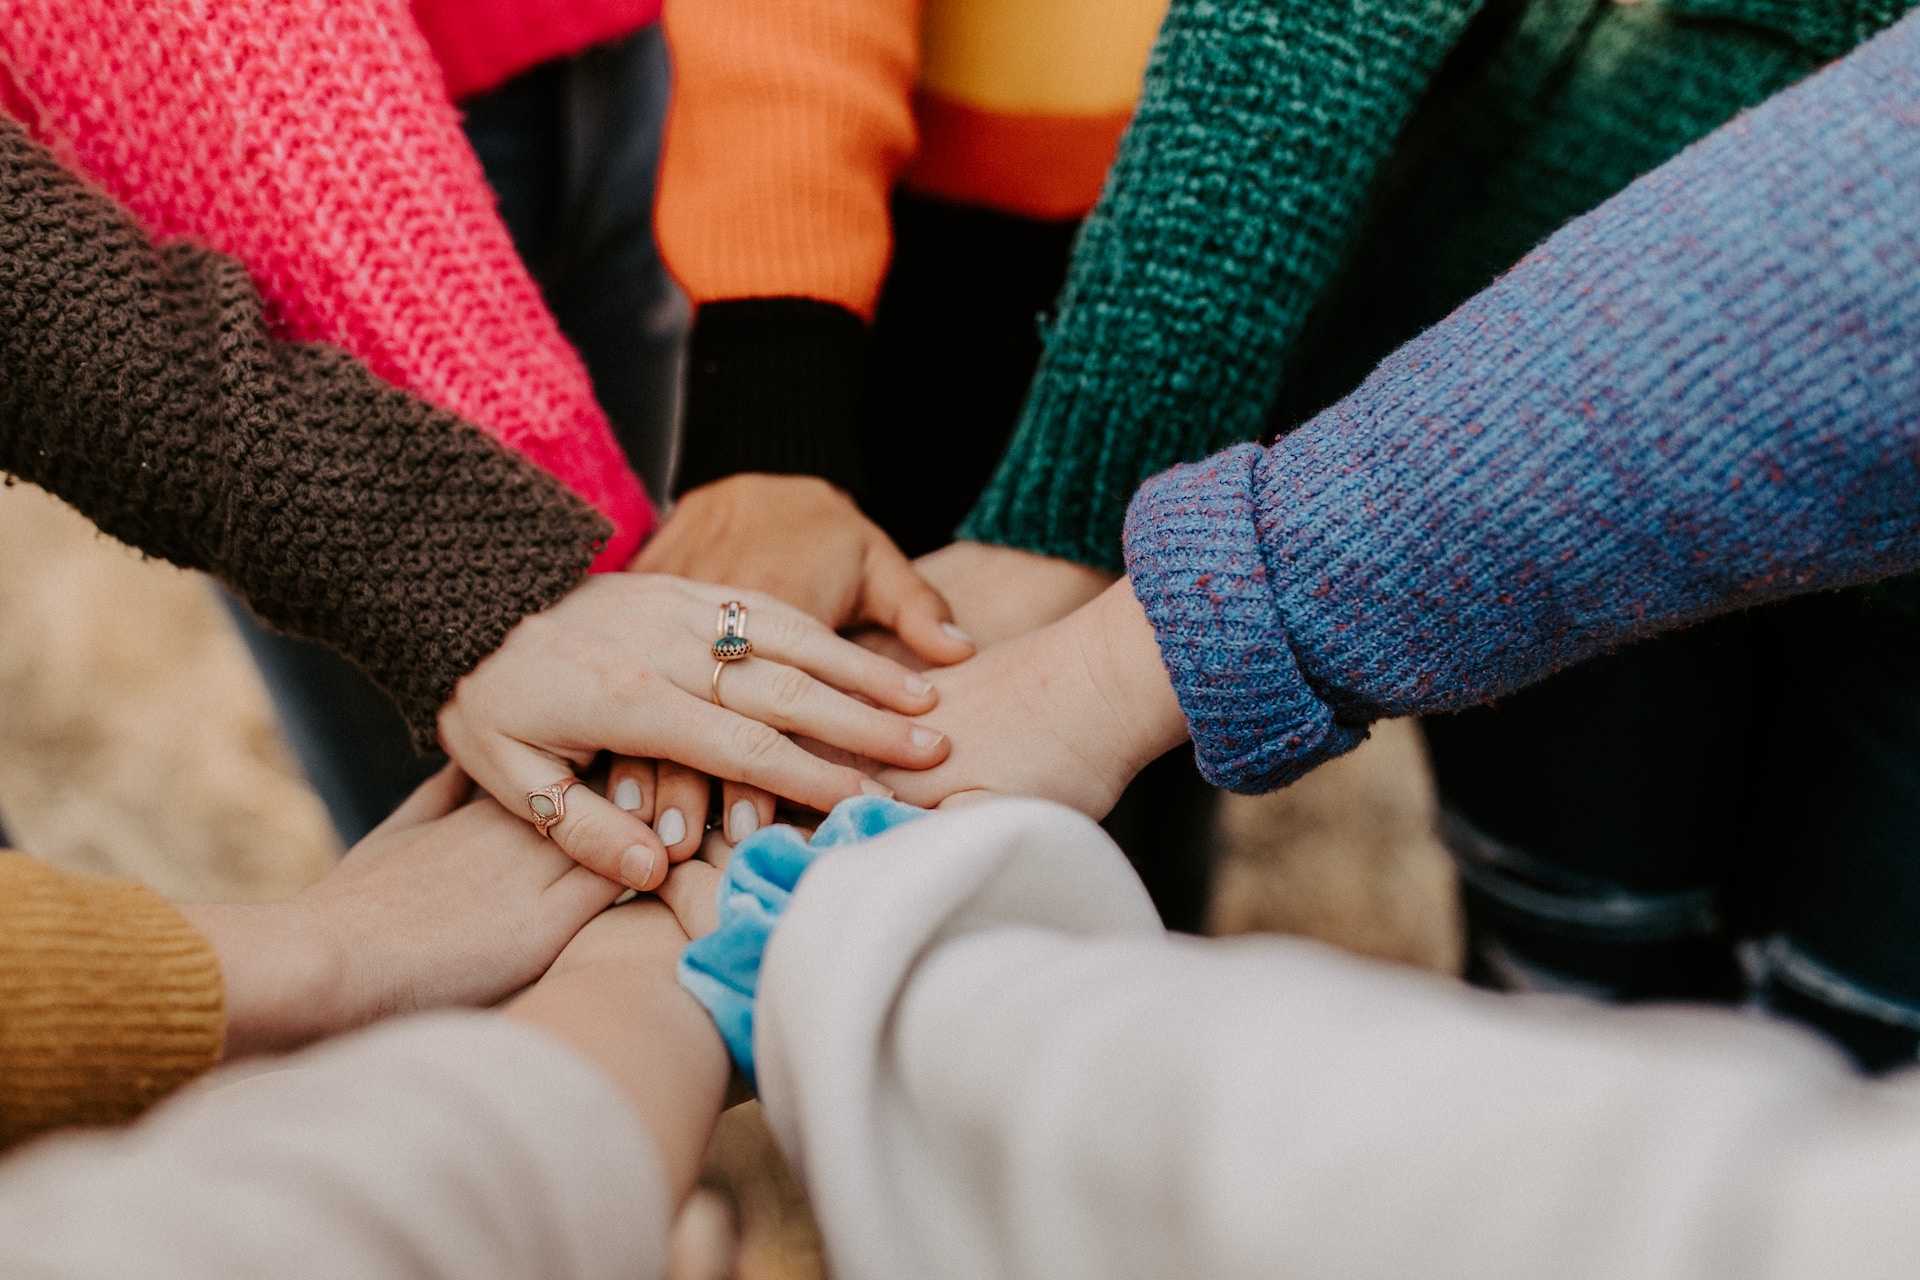 A group of young people with their hands together and a close up of their hands. They are wearing different colored sweaters and the hand on the top has three rings.